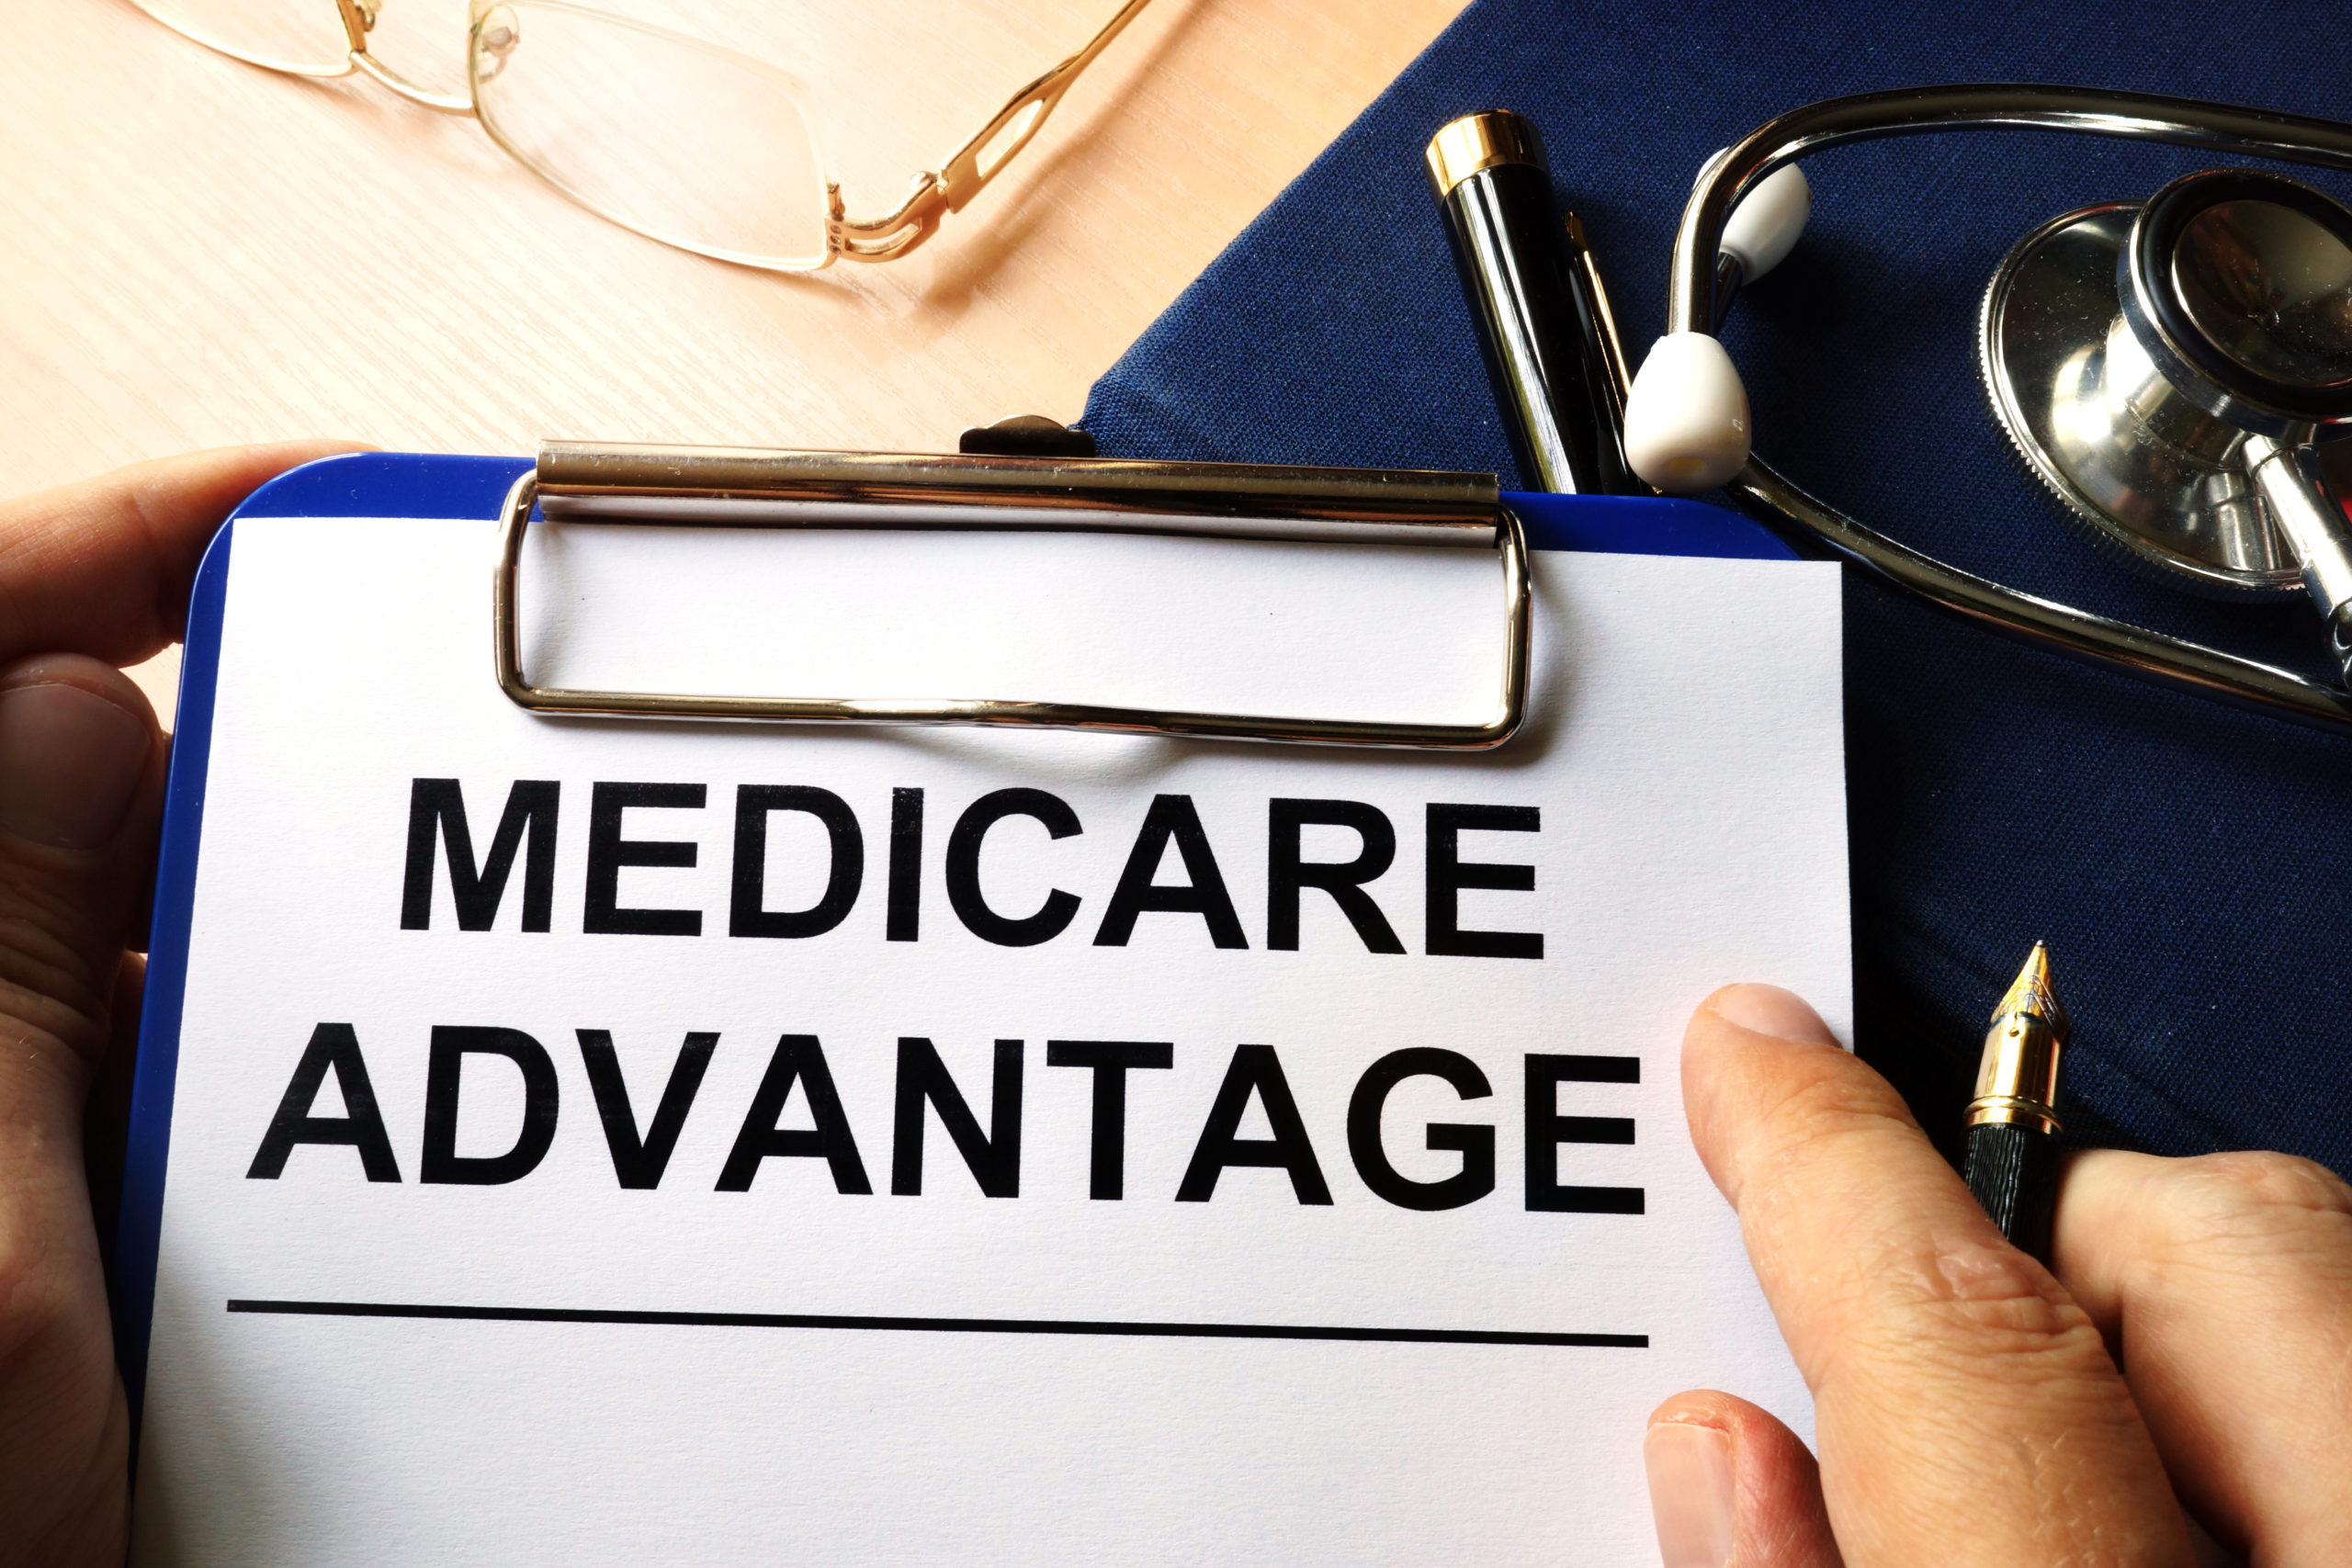 Click to learn more about Medicare Advantage plans